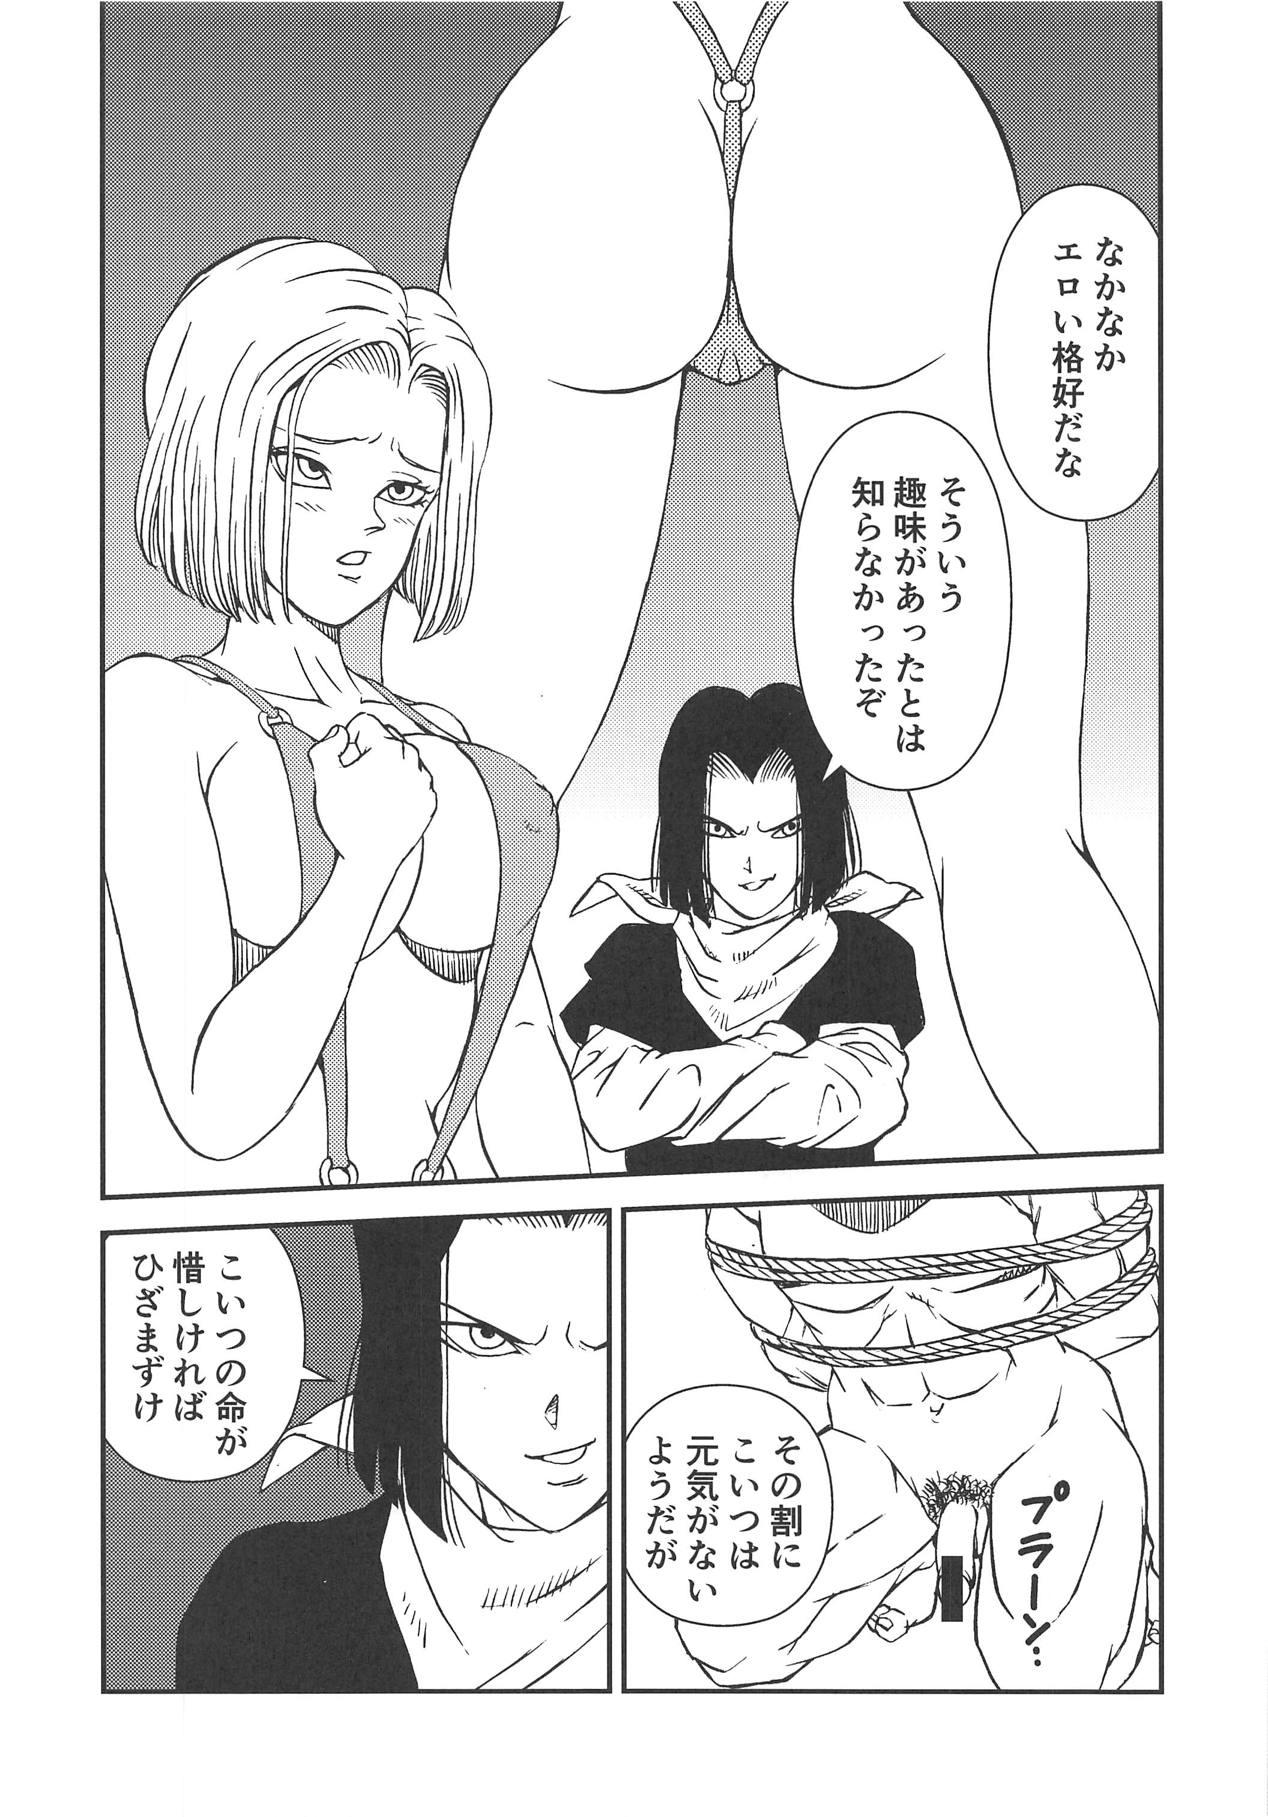 Shaved Pussy 18+ 3 - Dragon ball z Cuckold - Page 6